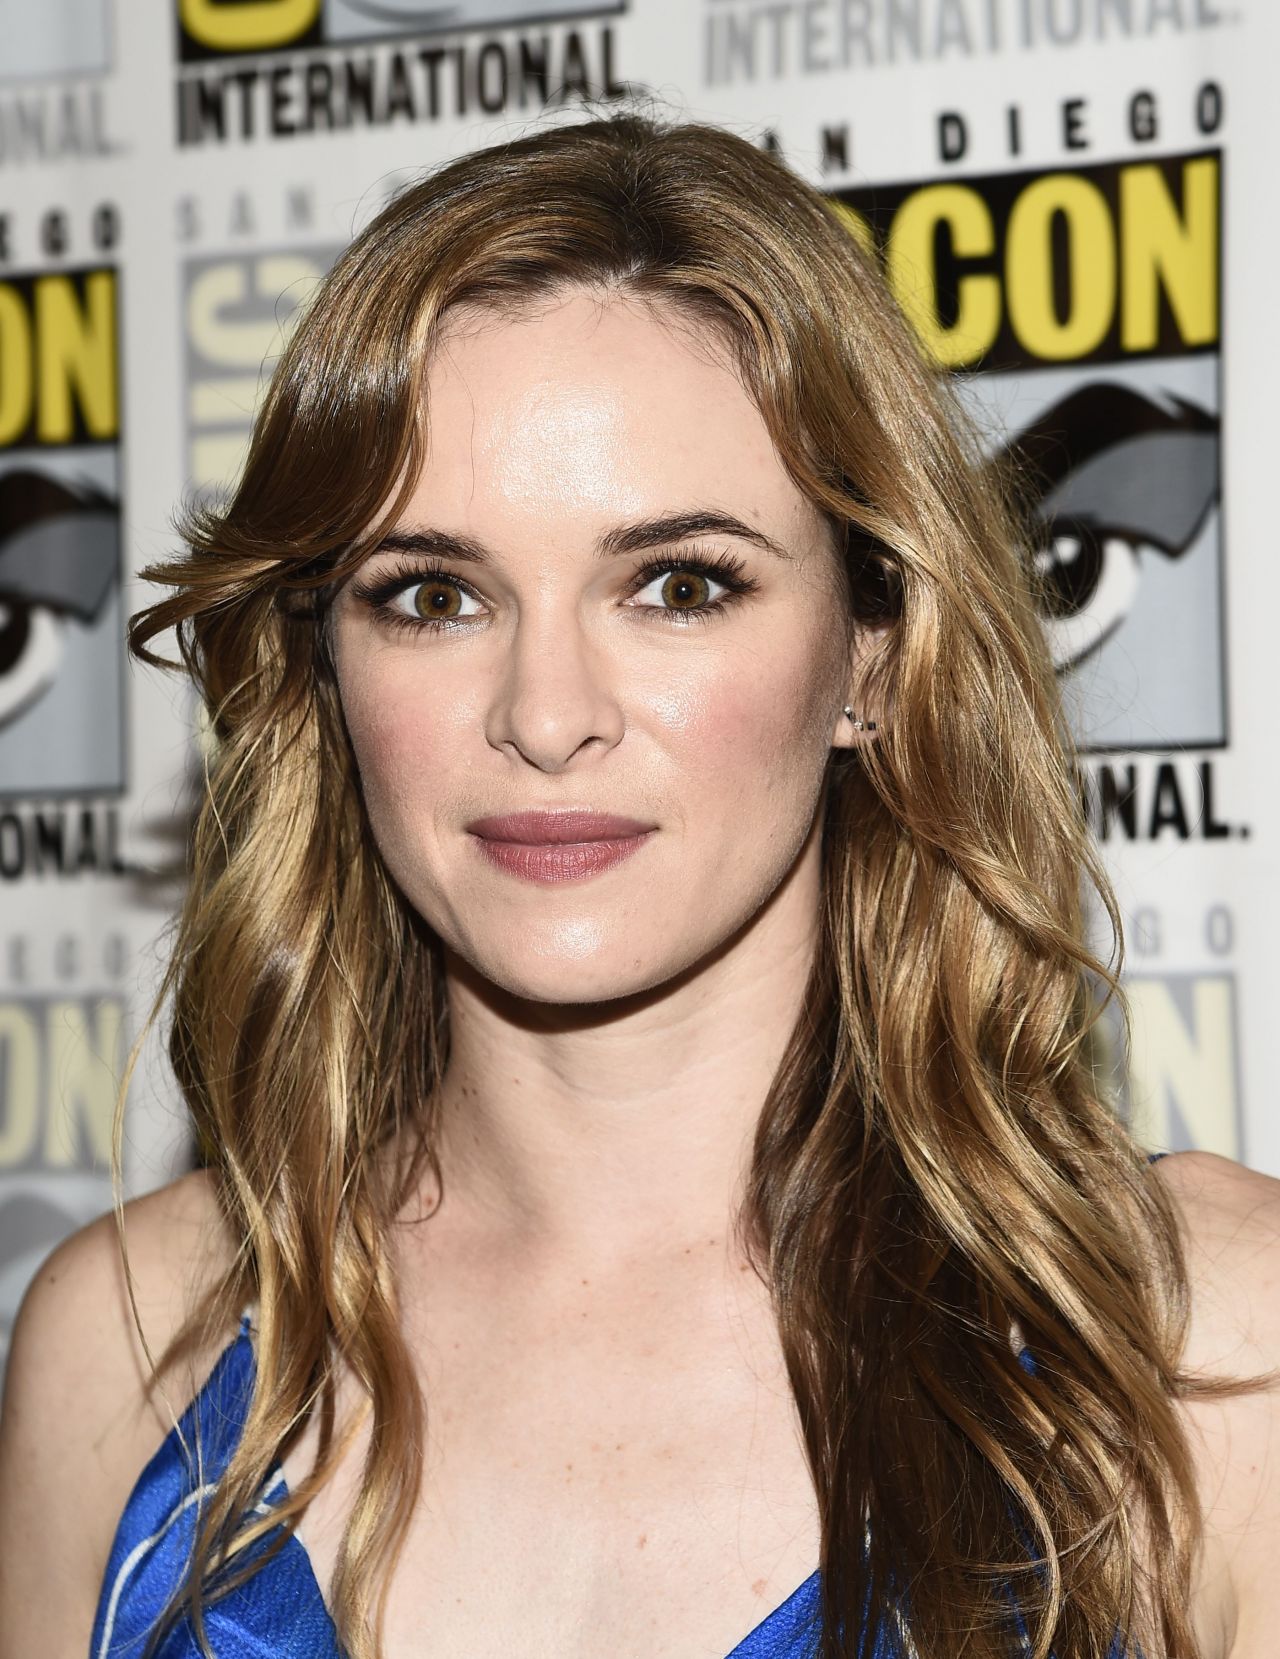 Danielle panabaker sexy